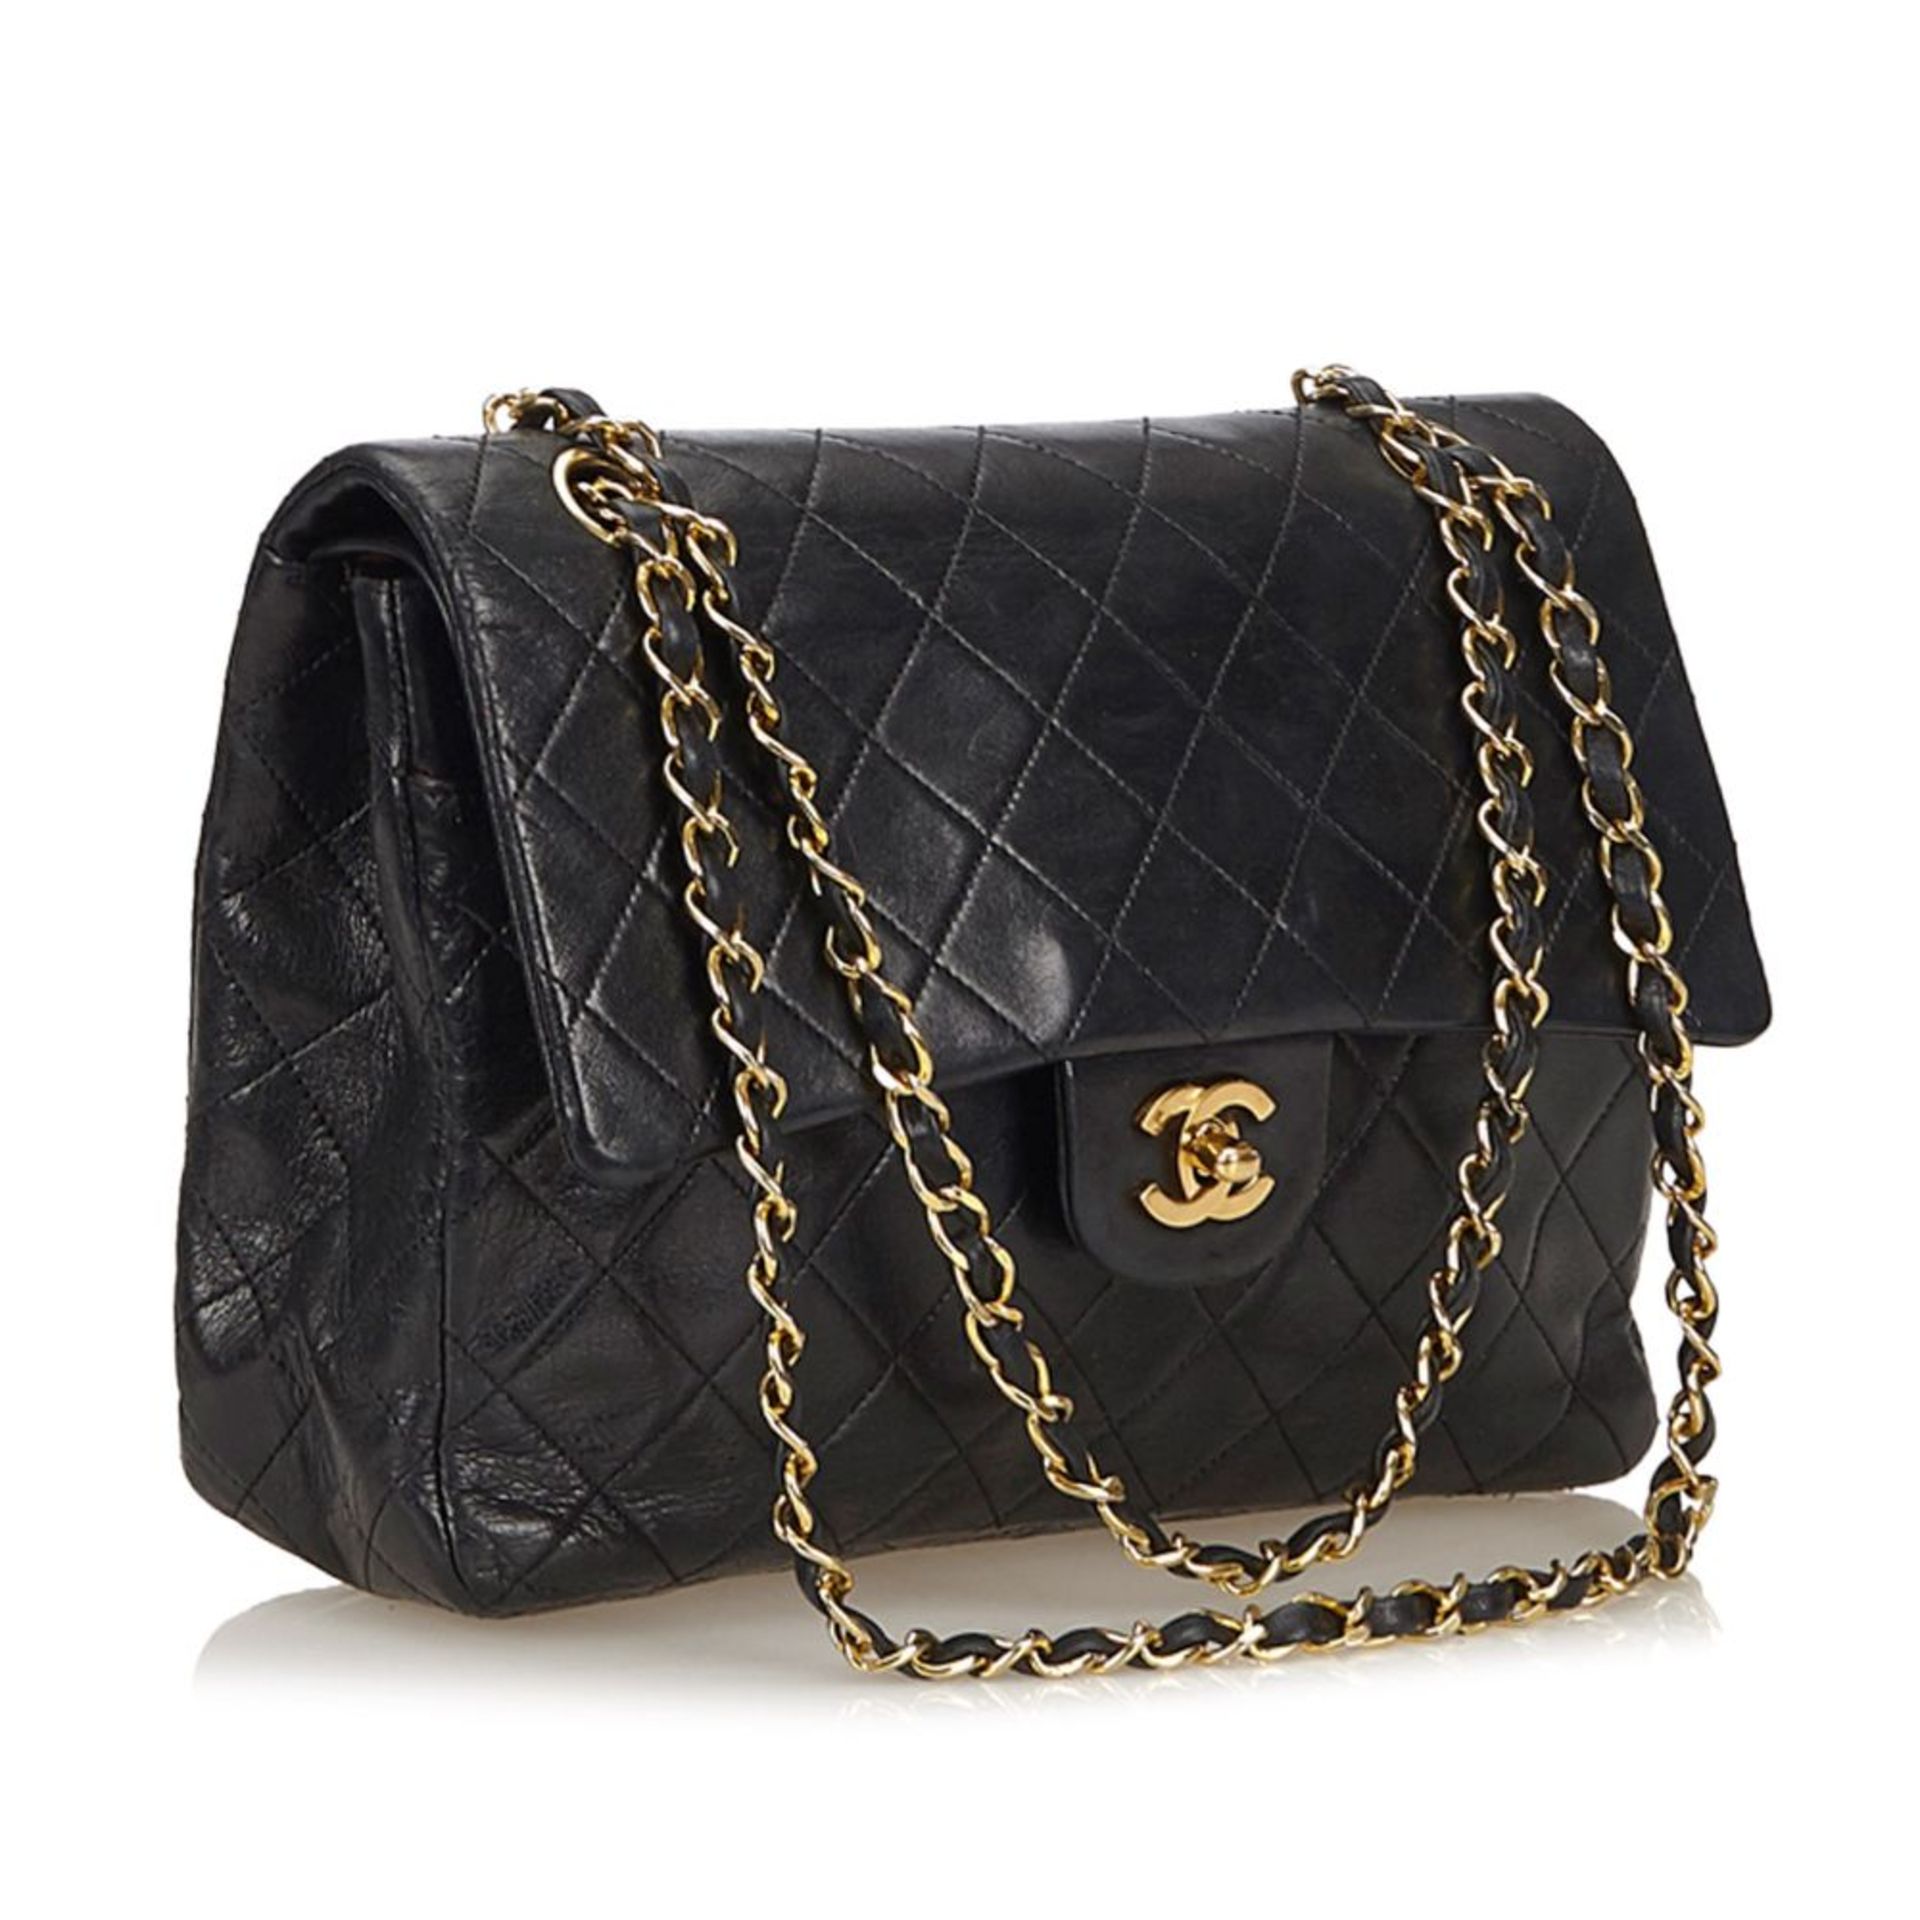 A Chanel classic medium double flap shoulder bag,featuring a quilted leather body, chain shoulder - Image 2 of 6